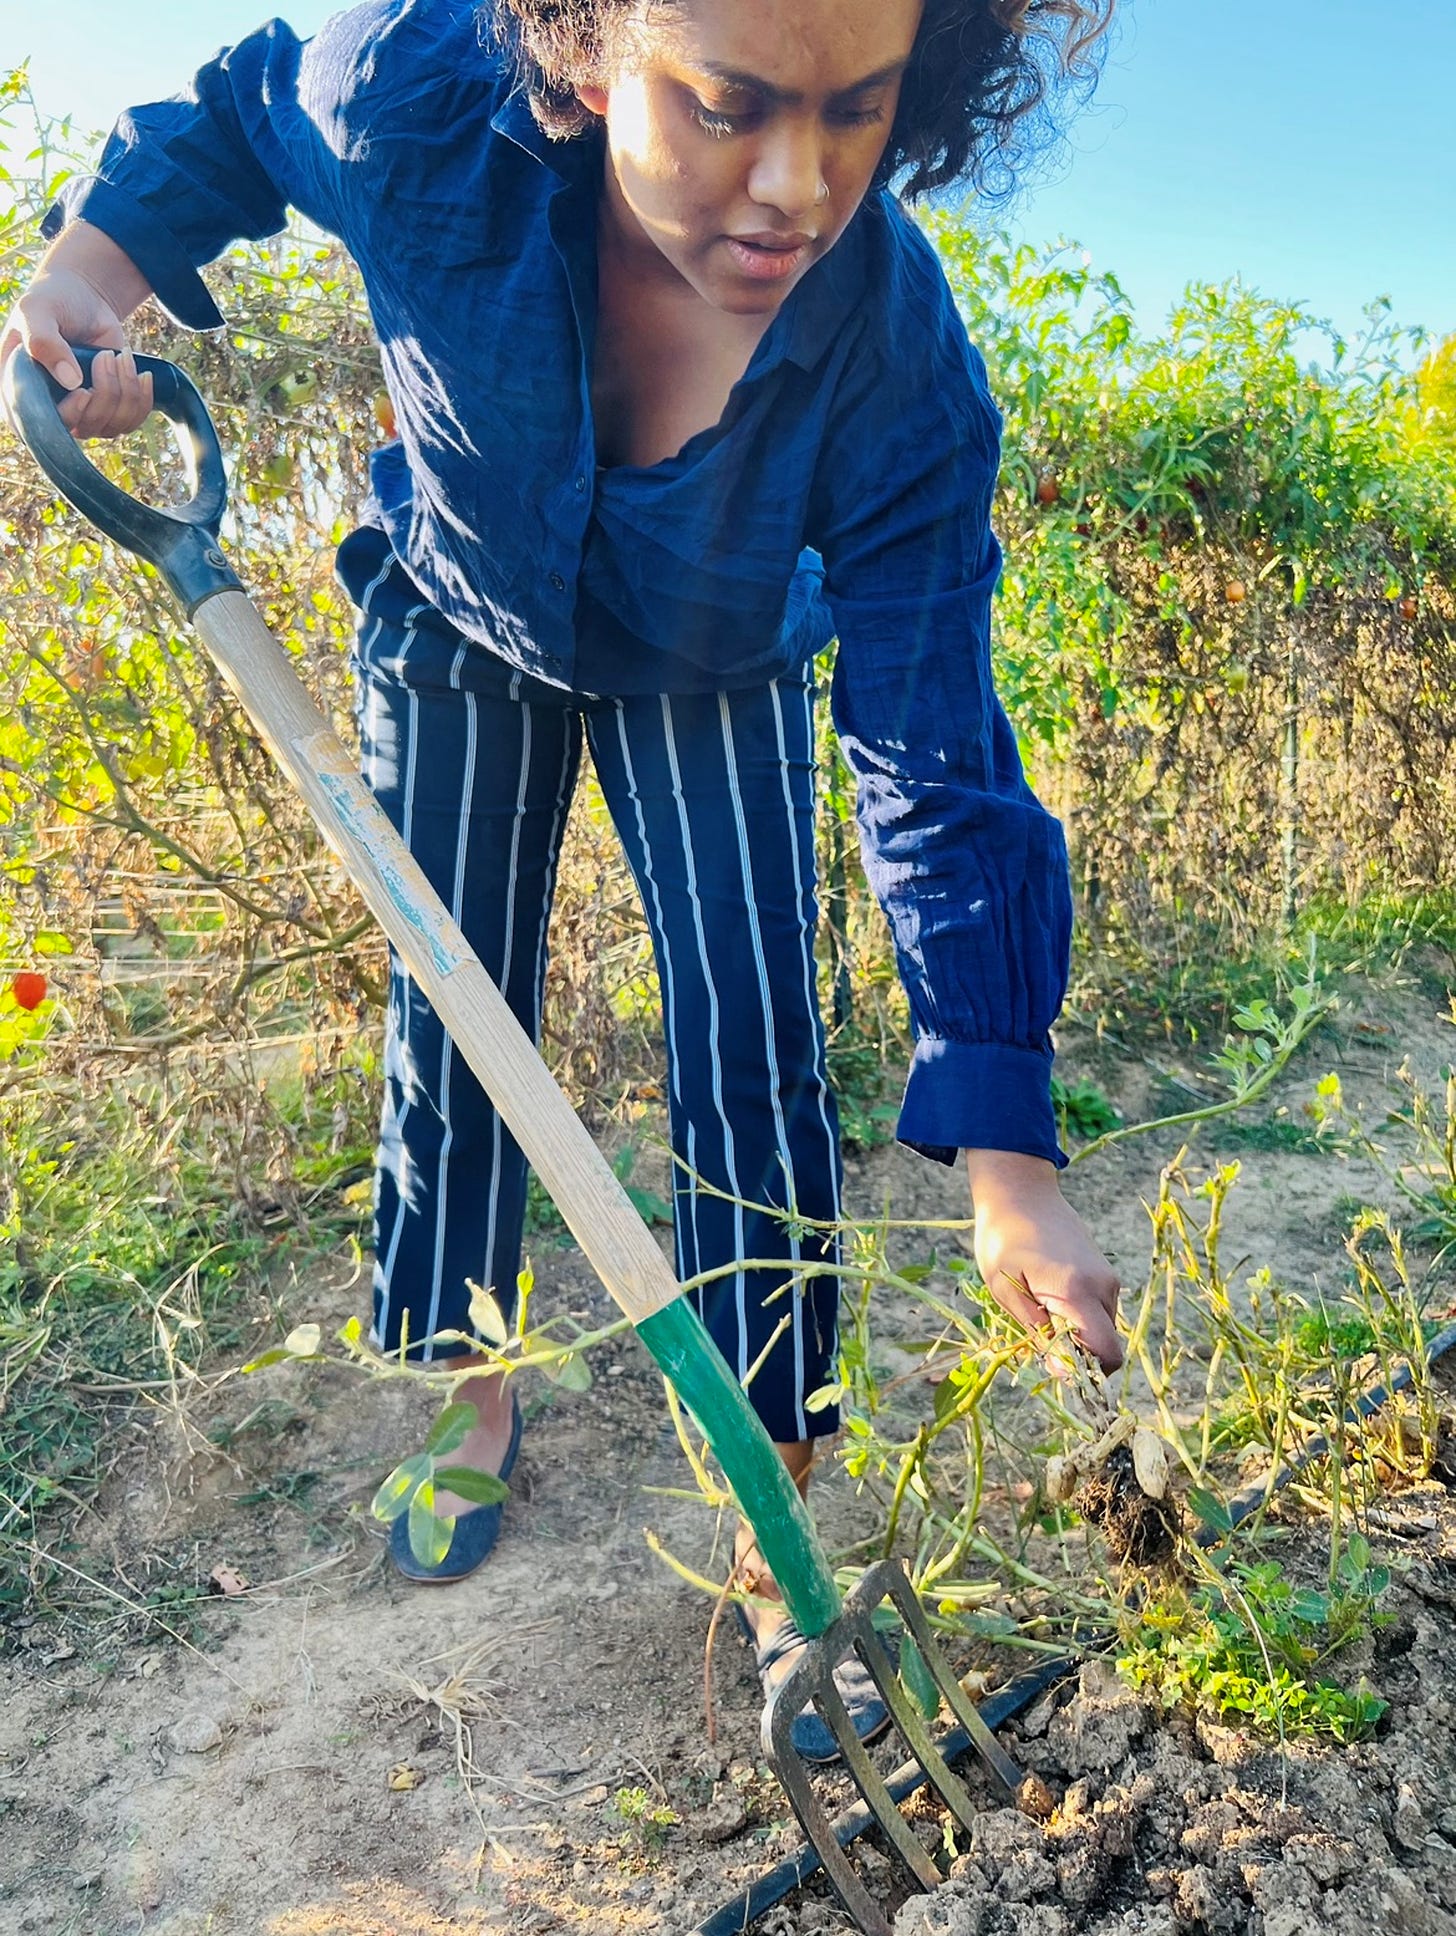 Ayesha plowing & shaking off soil to harvest peanuts at the community garden